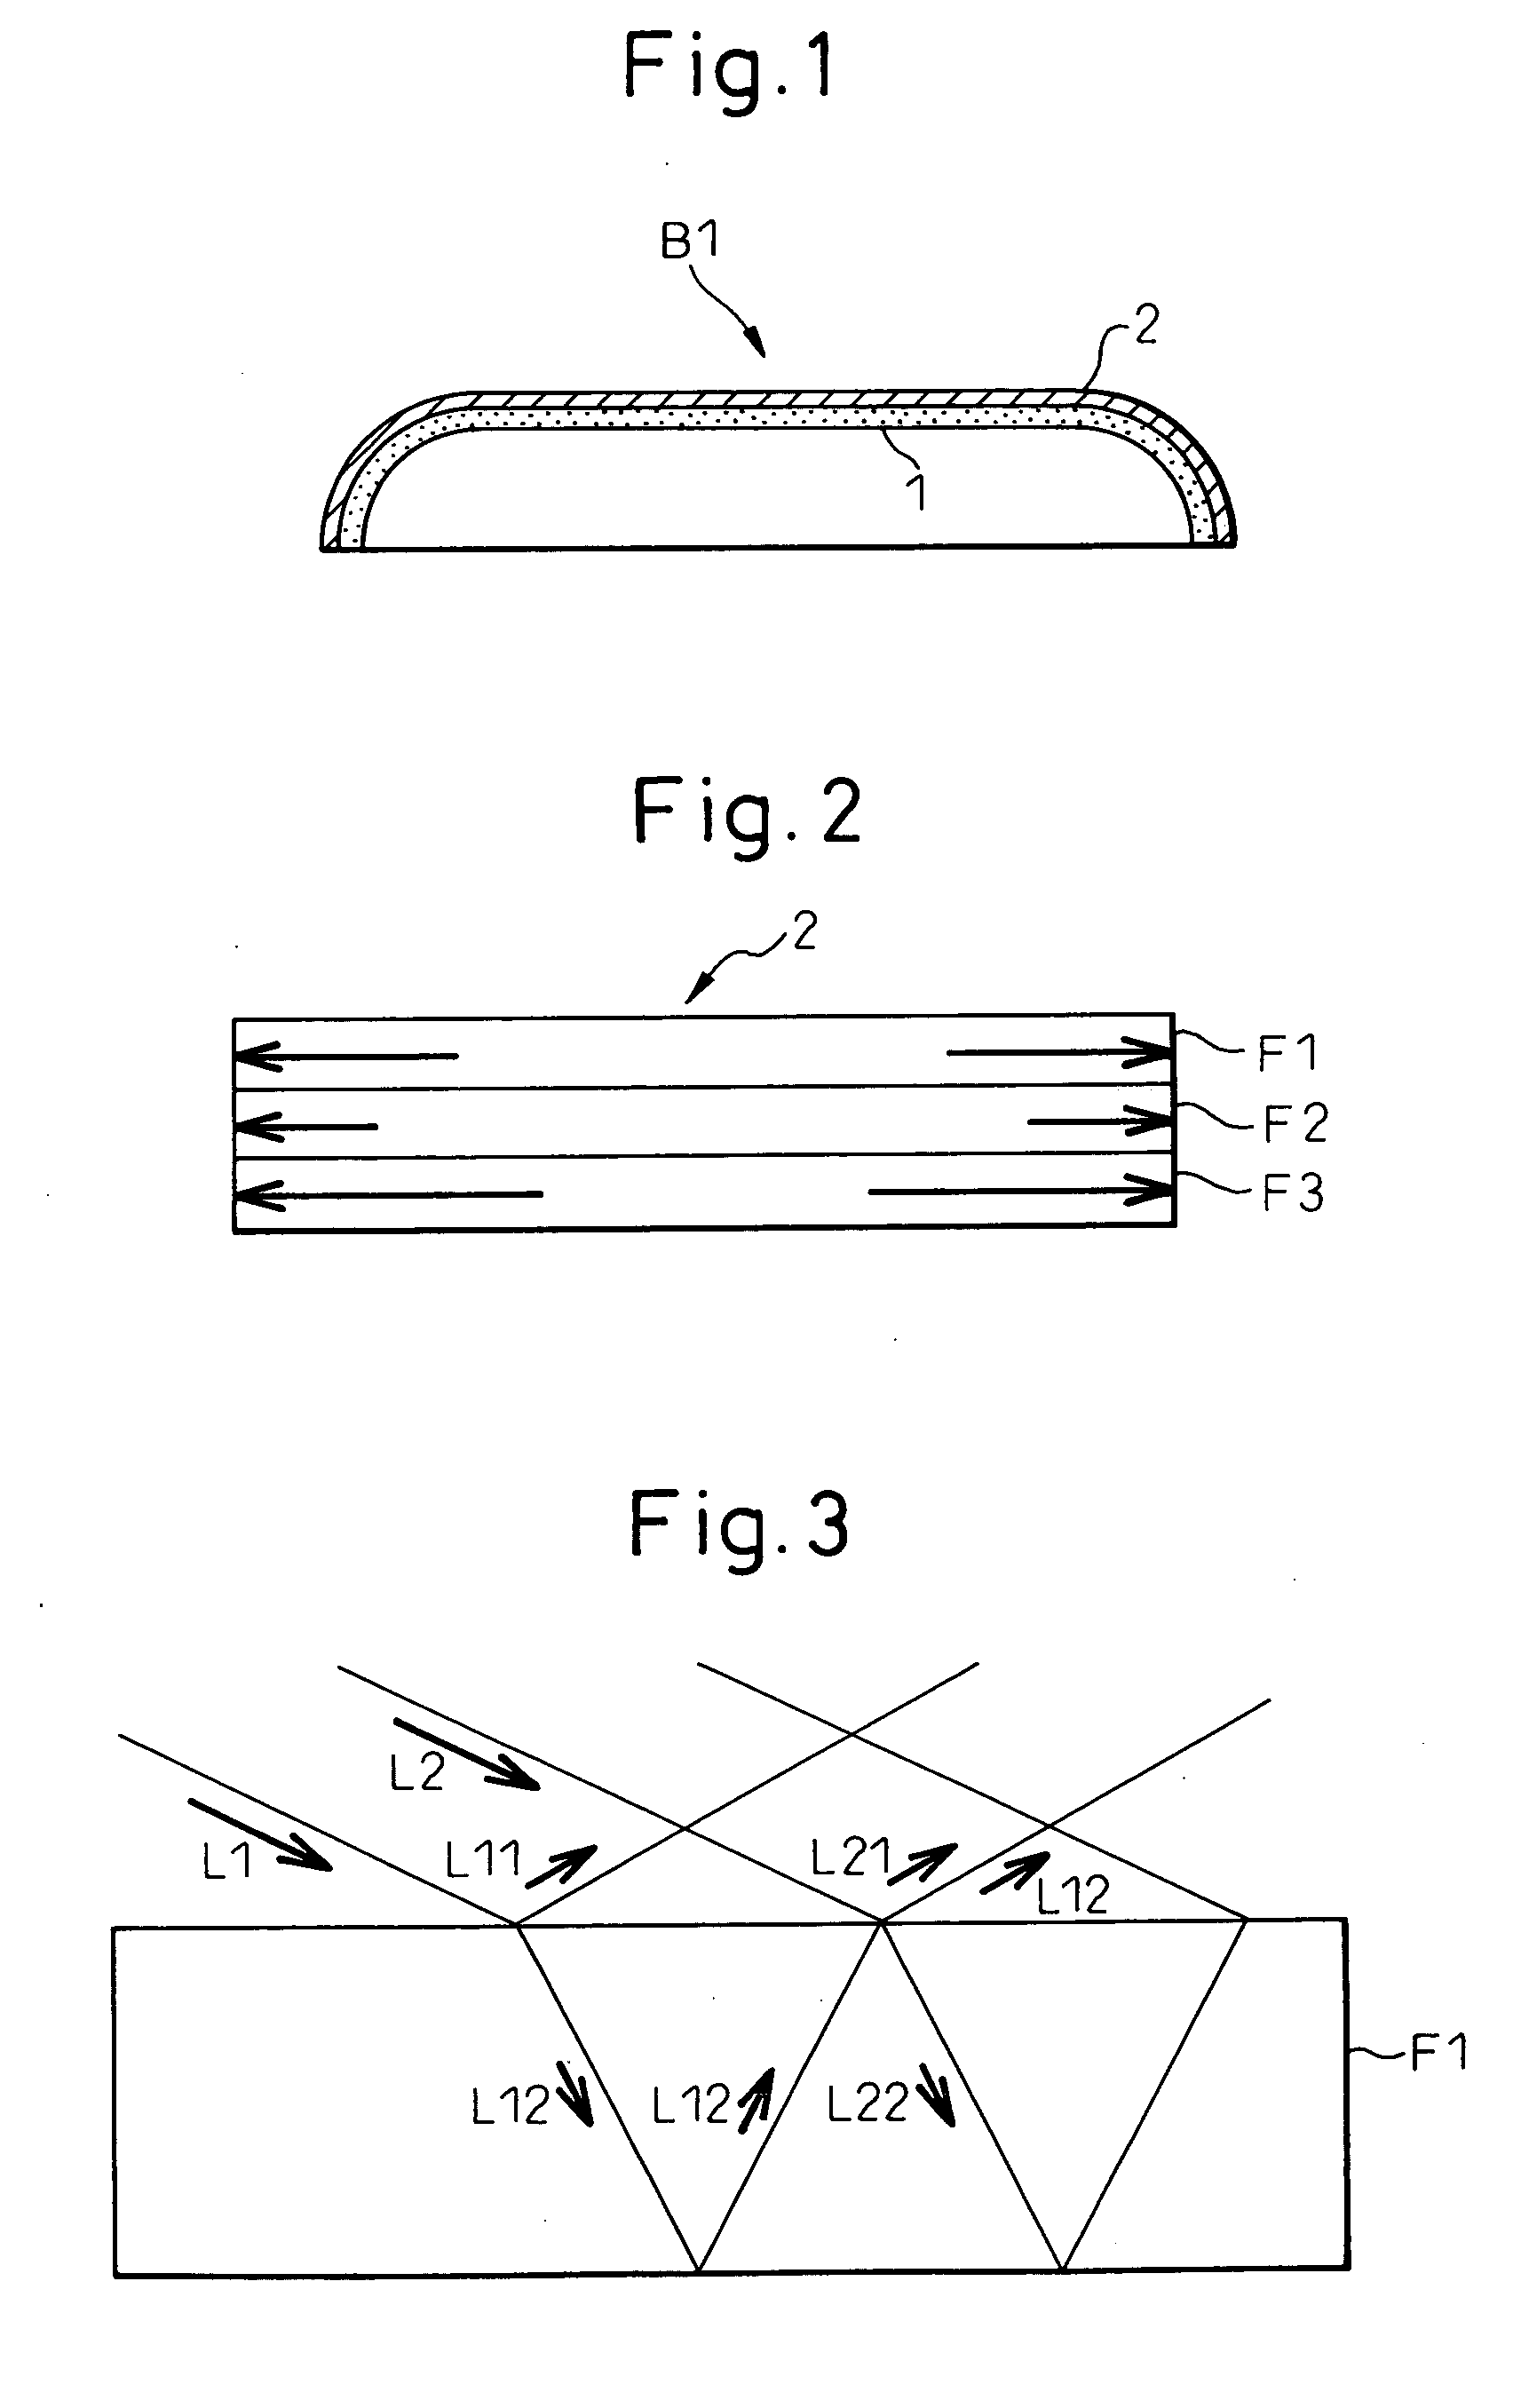 Casing formed from thermoplastic resin and method for fabricating the casing